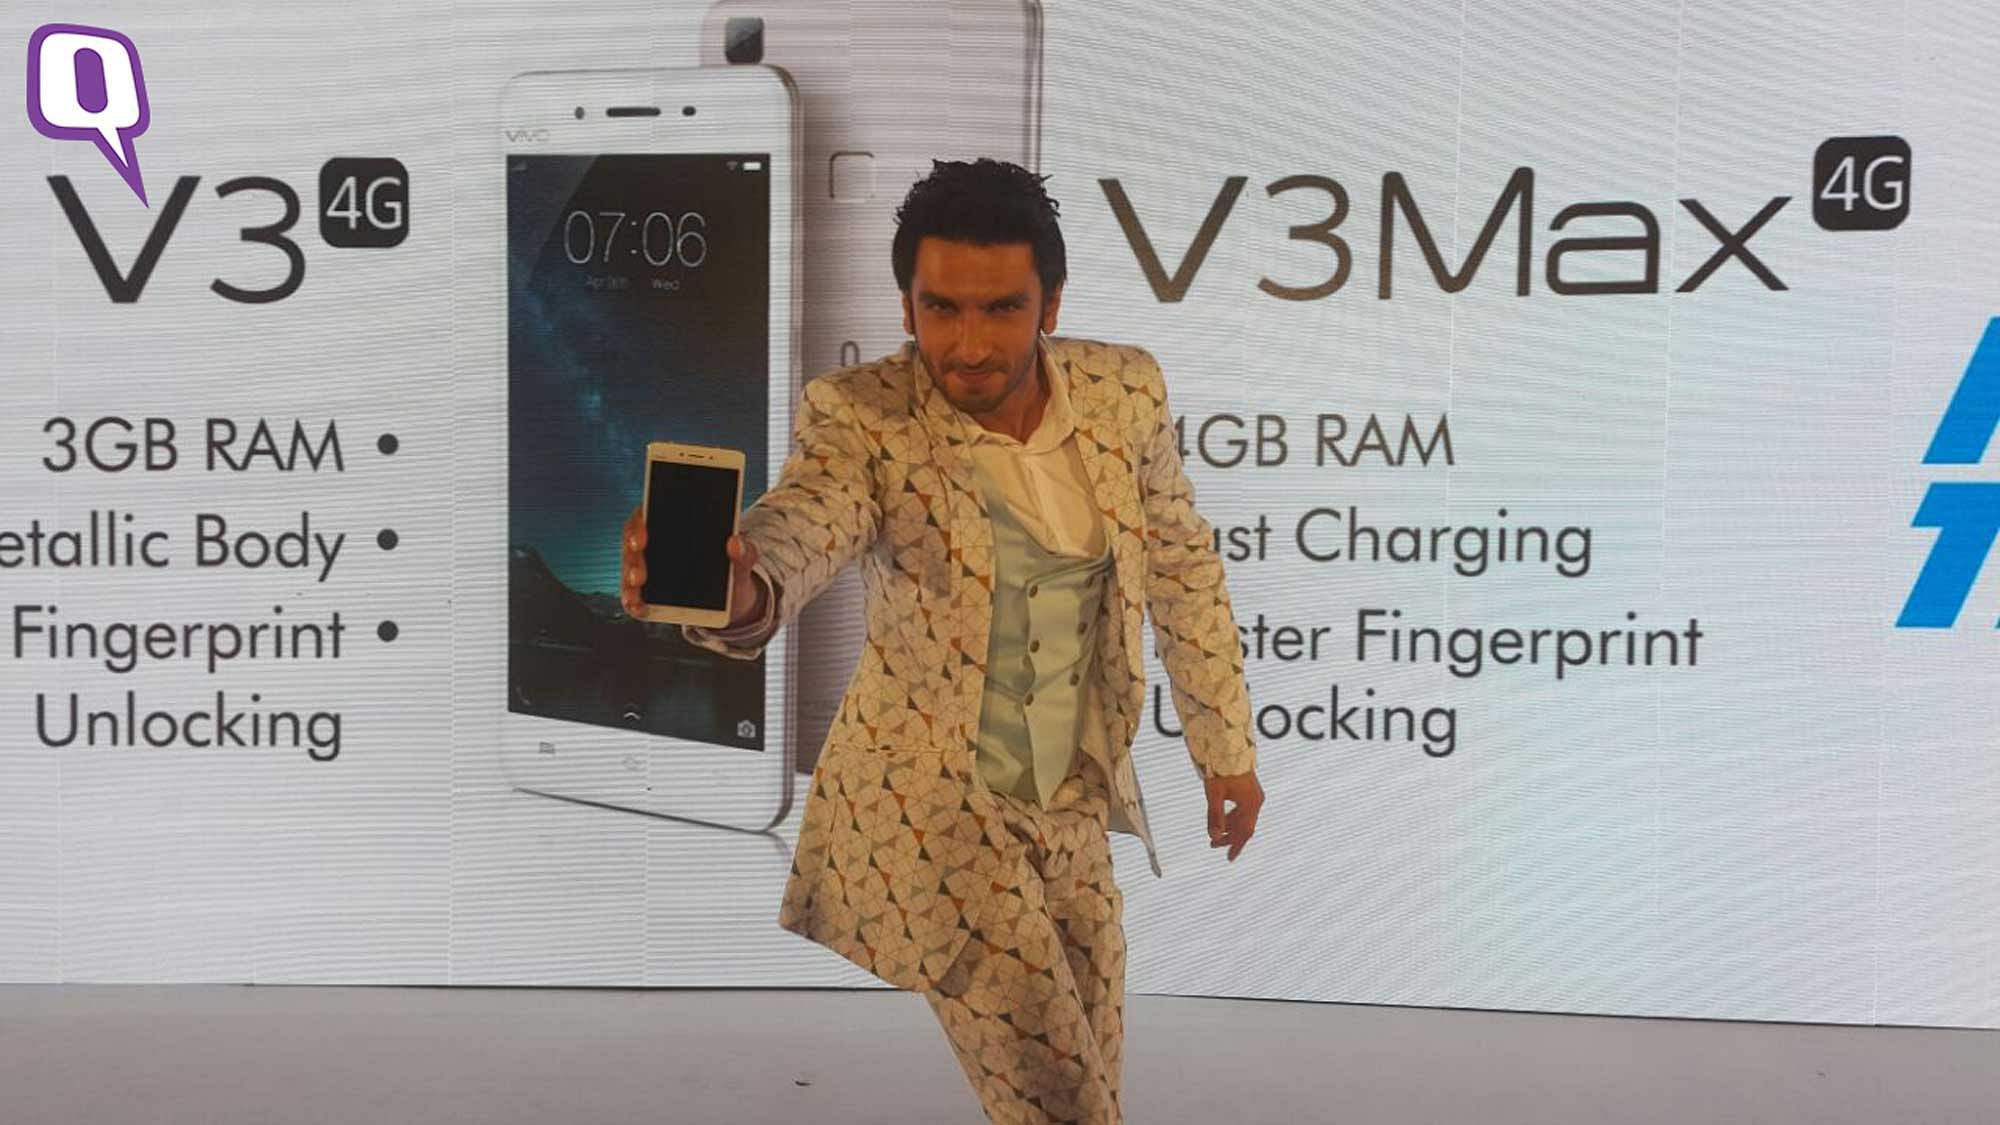 Ranveer Singh is the new face of Vivo smartphones in India. (Photo: <b>The Quint</b>)